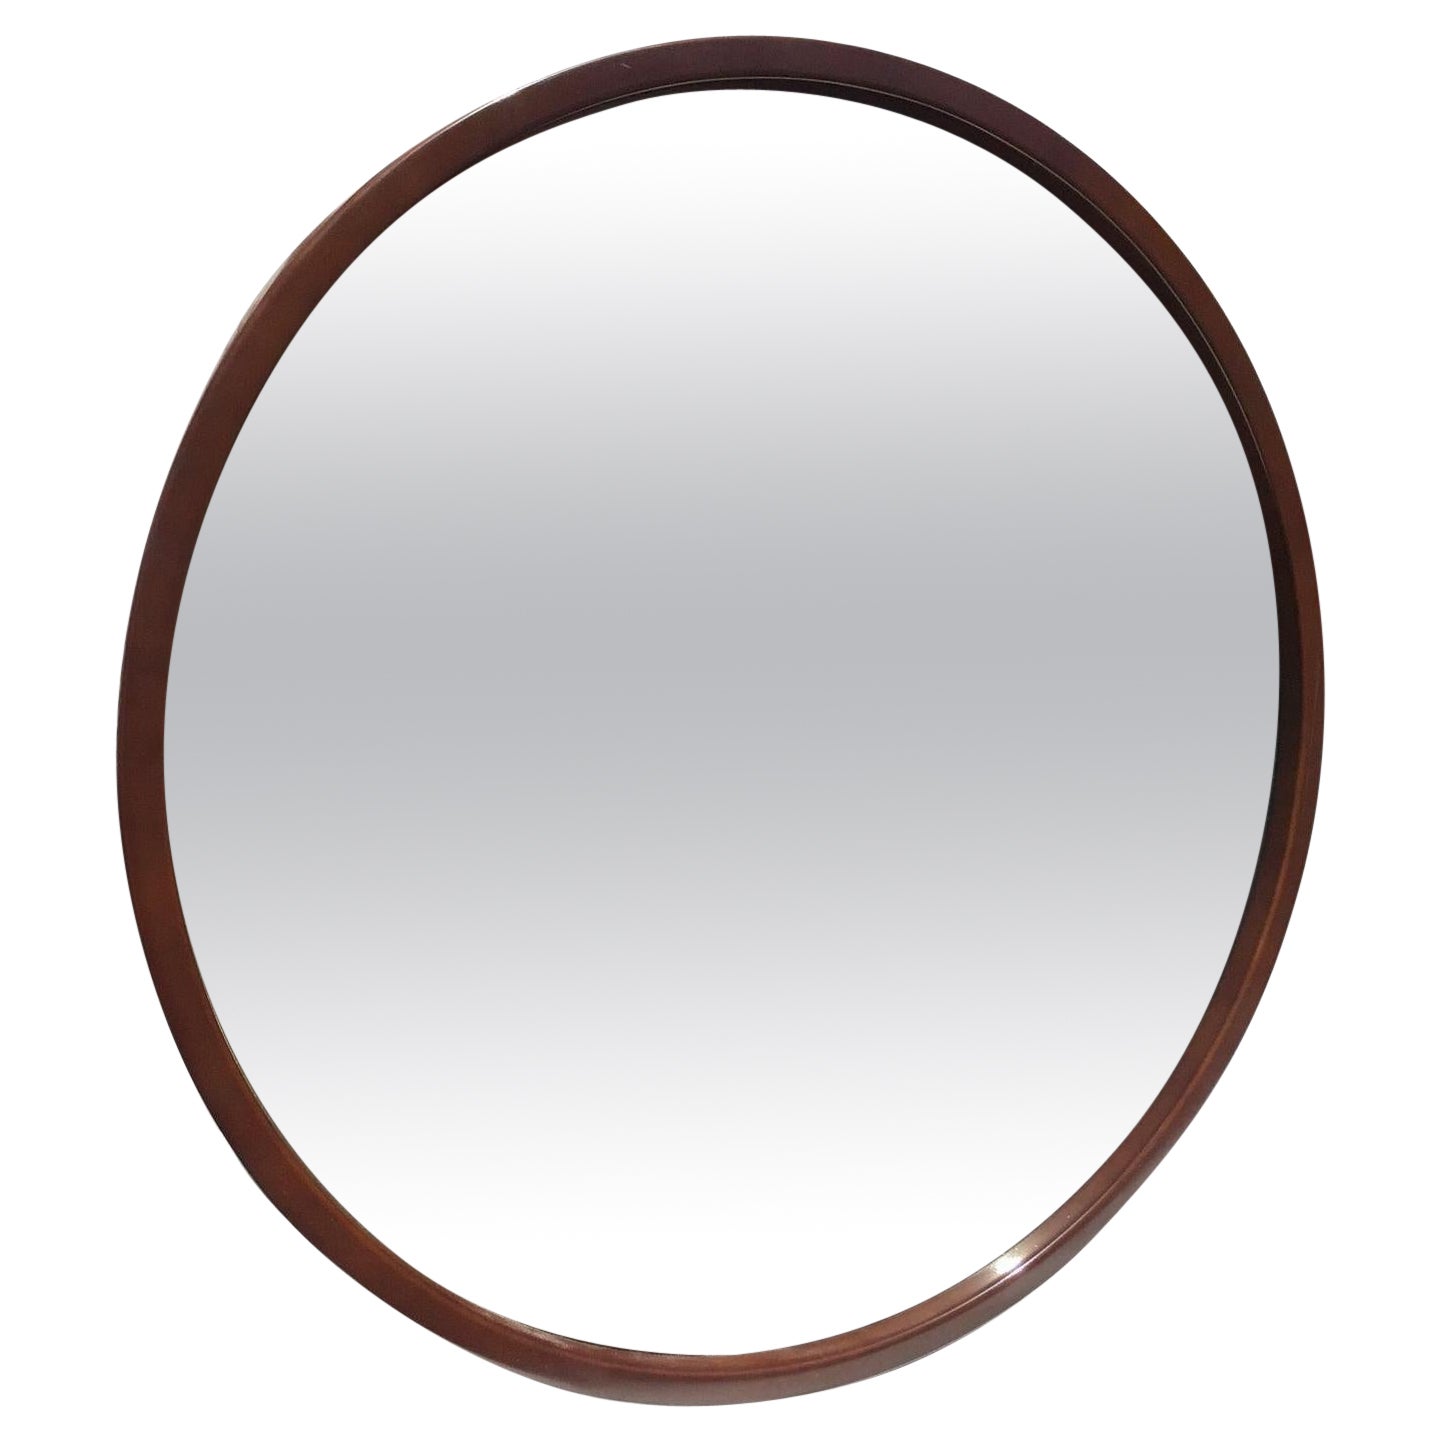 Modern Circular Mirror in Brown Lacquered Wood from the 70s. Danish School Style